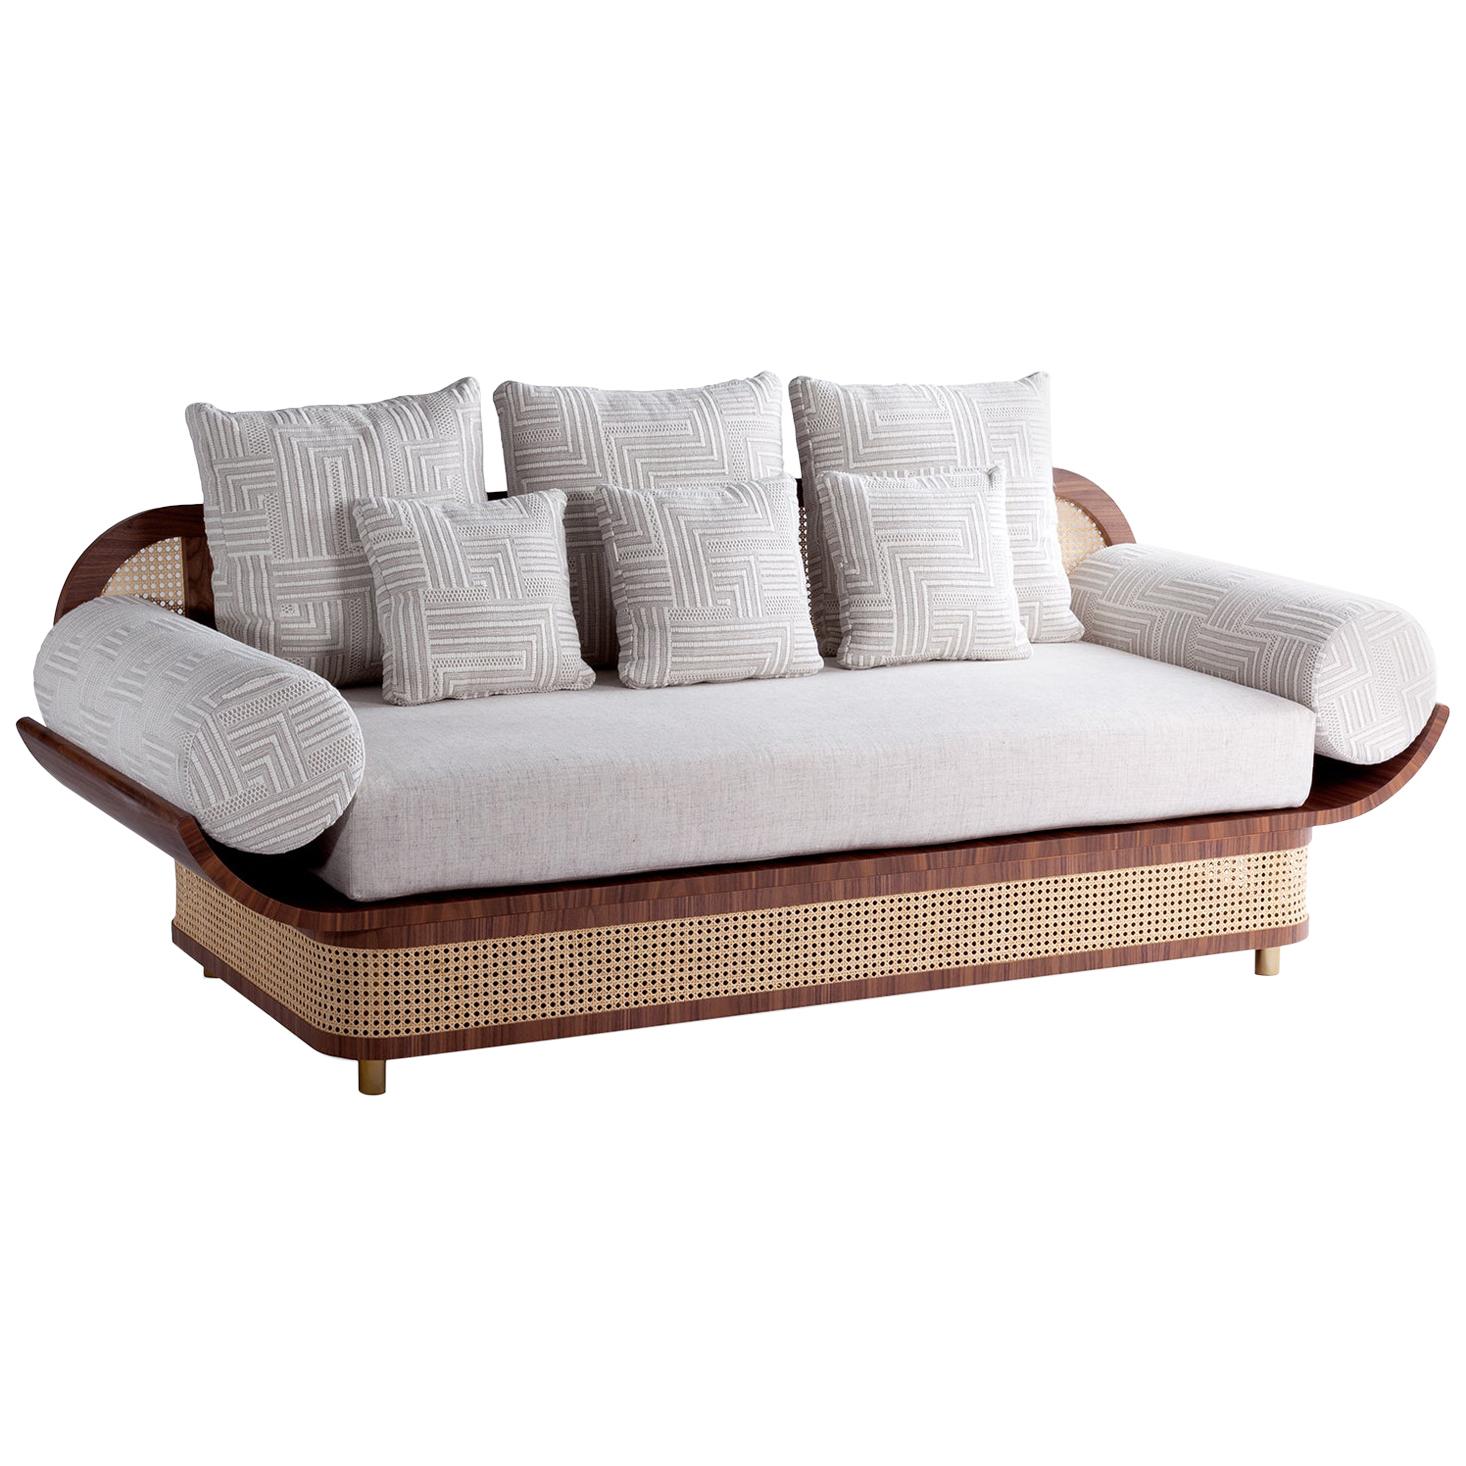 DOOQ Sofa Settee with Textured Fabric, Natural Walnut and Brass Details Majestic